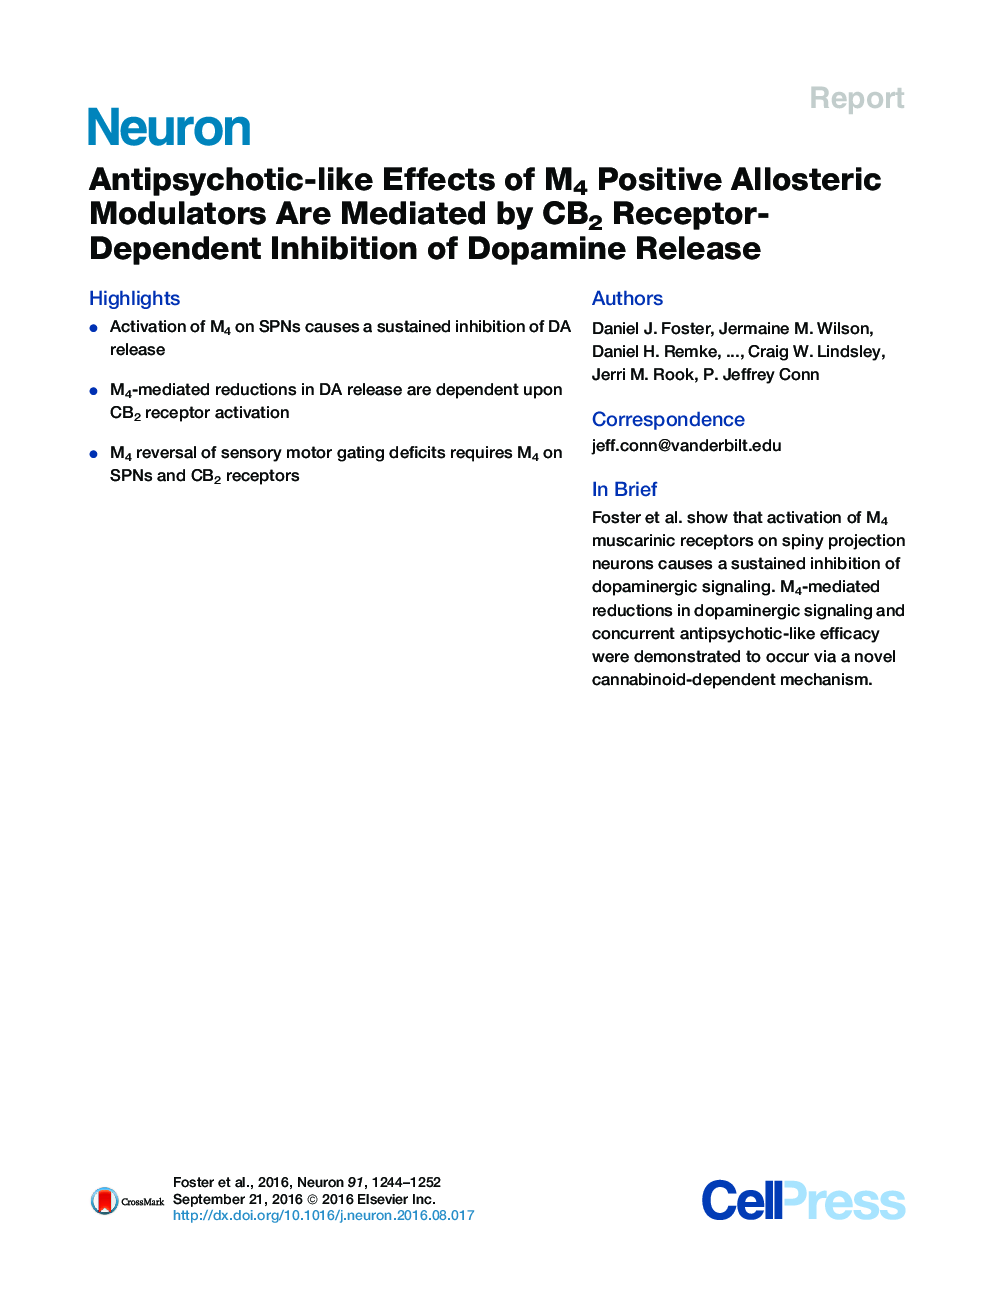 Antipsychotic-like Effects of M4 Positive Allosteric Modulators Are Mediated by CB2 Receptor-Dependent Inhibition of Dopamine Release